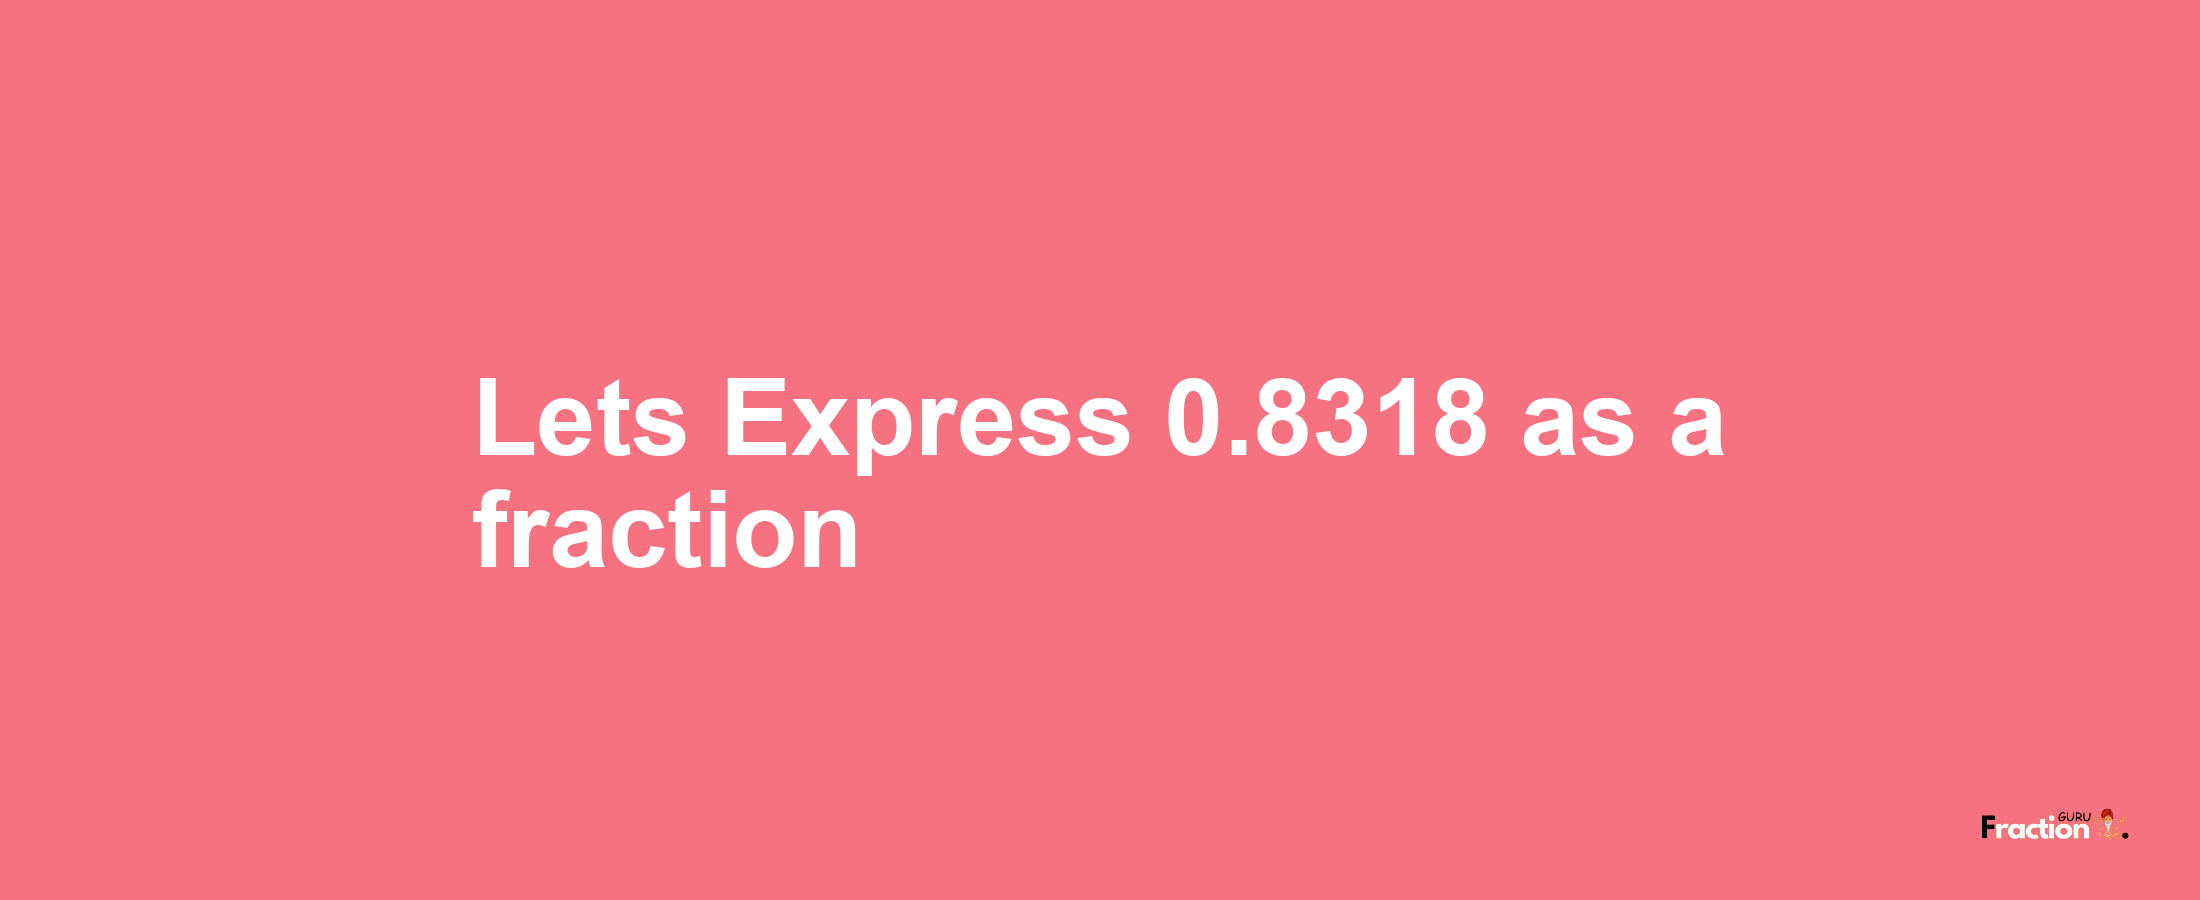 Lets Express 0.8318 as afraction